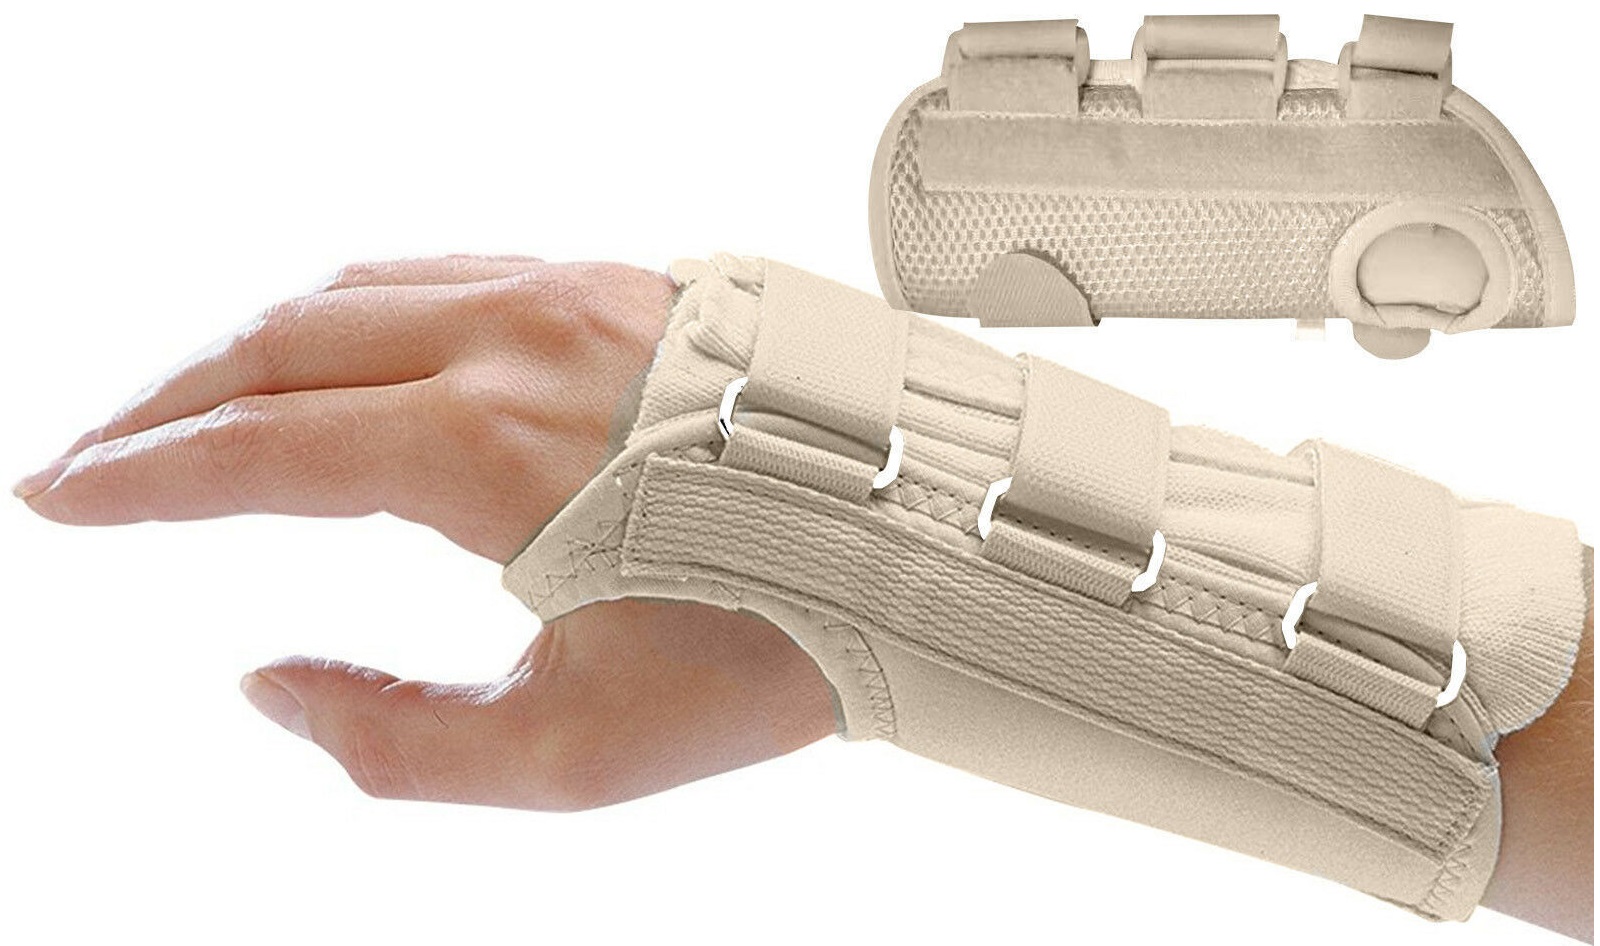 Small Beige Right Hand Adjustable Wrist Support Brace Carpal Tunnel Fractures Splint